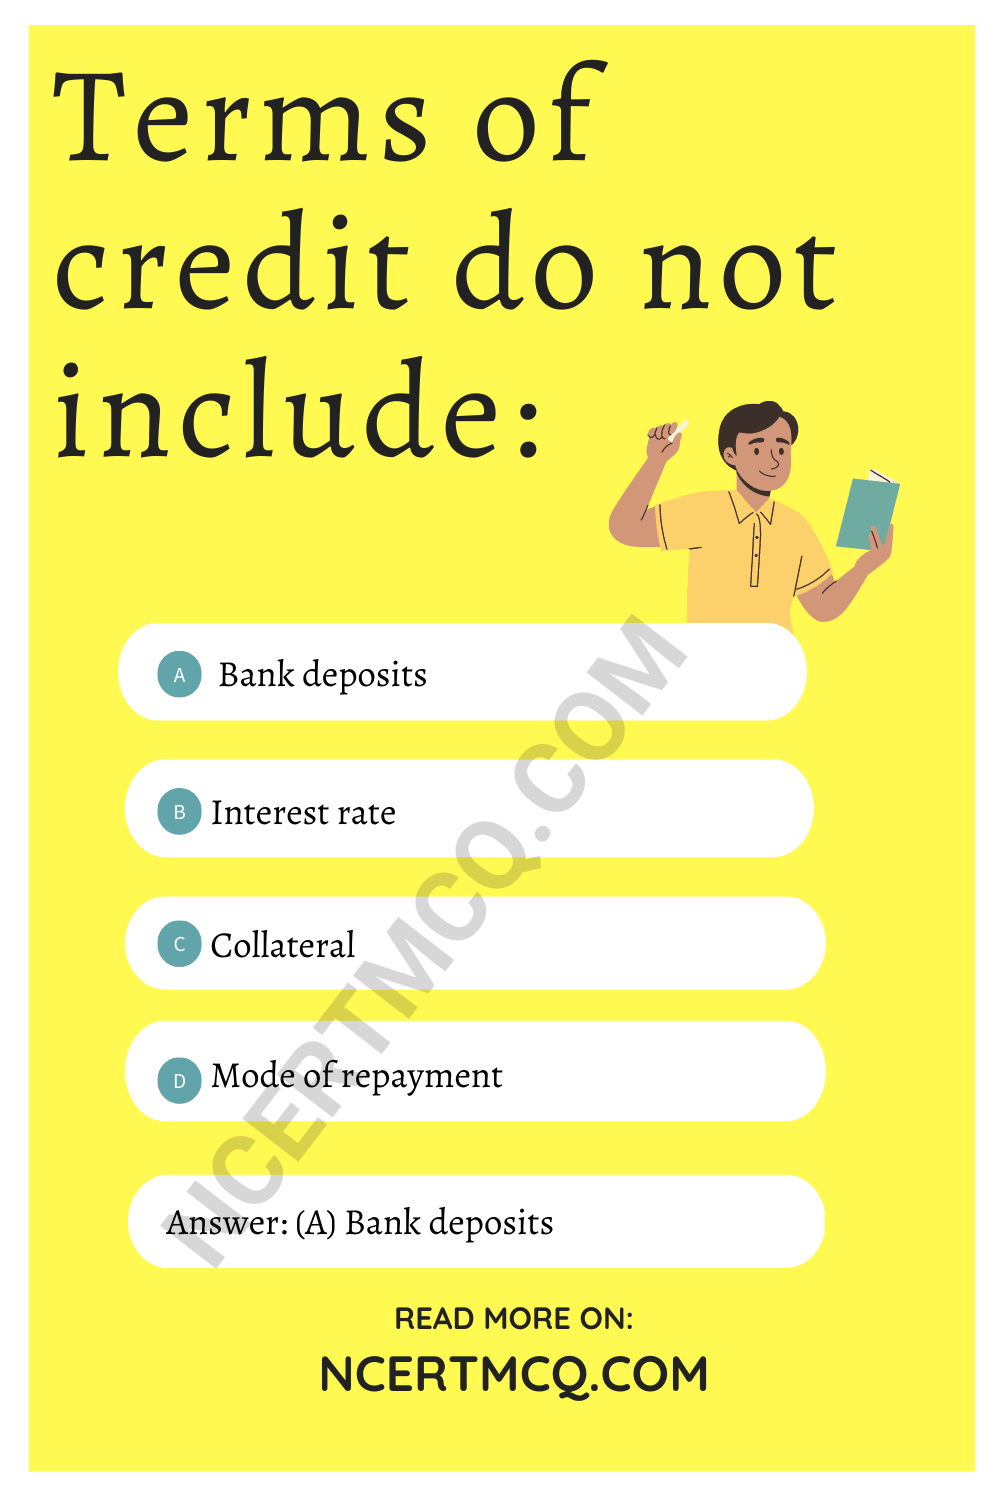 Terms of credit do not include: